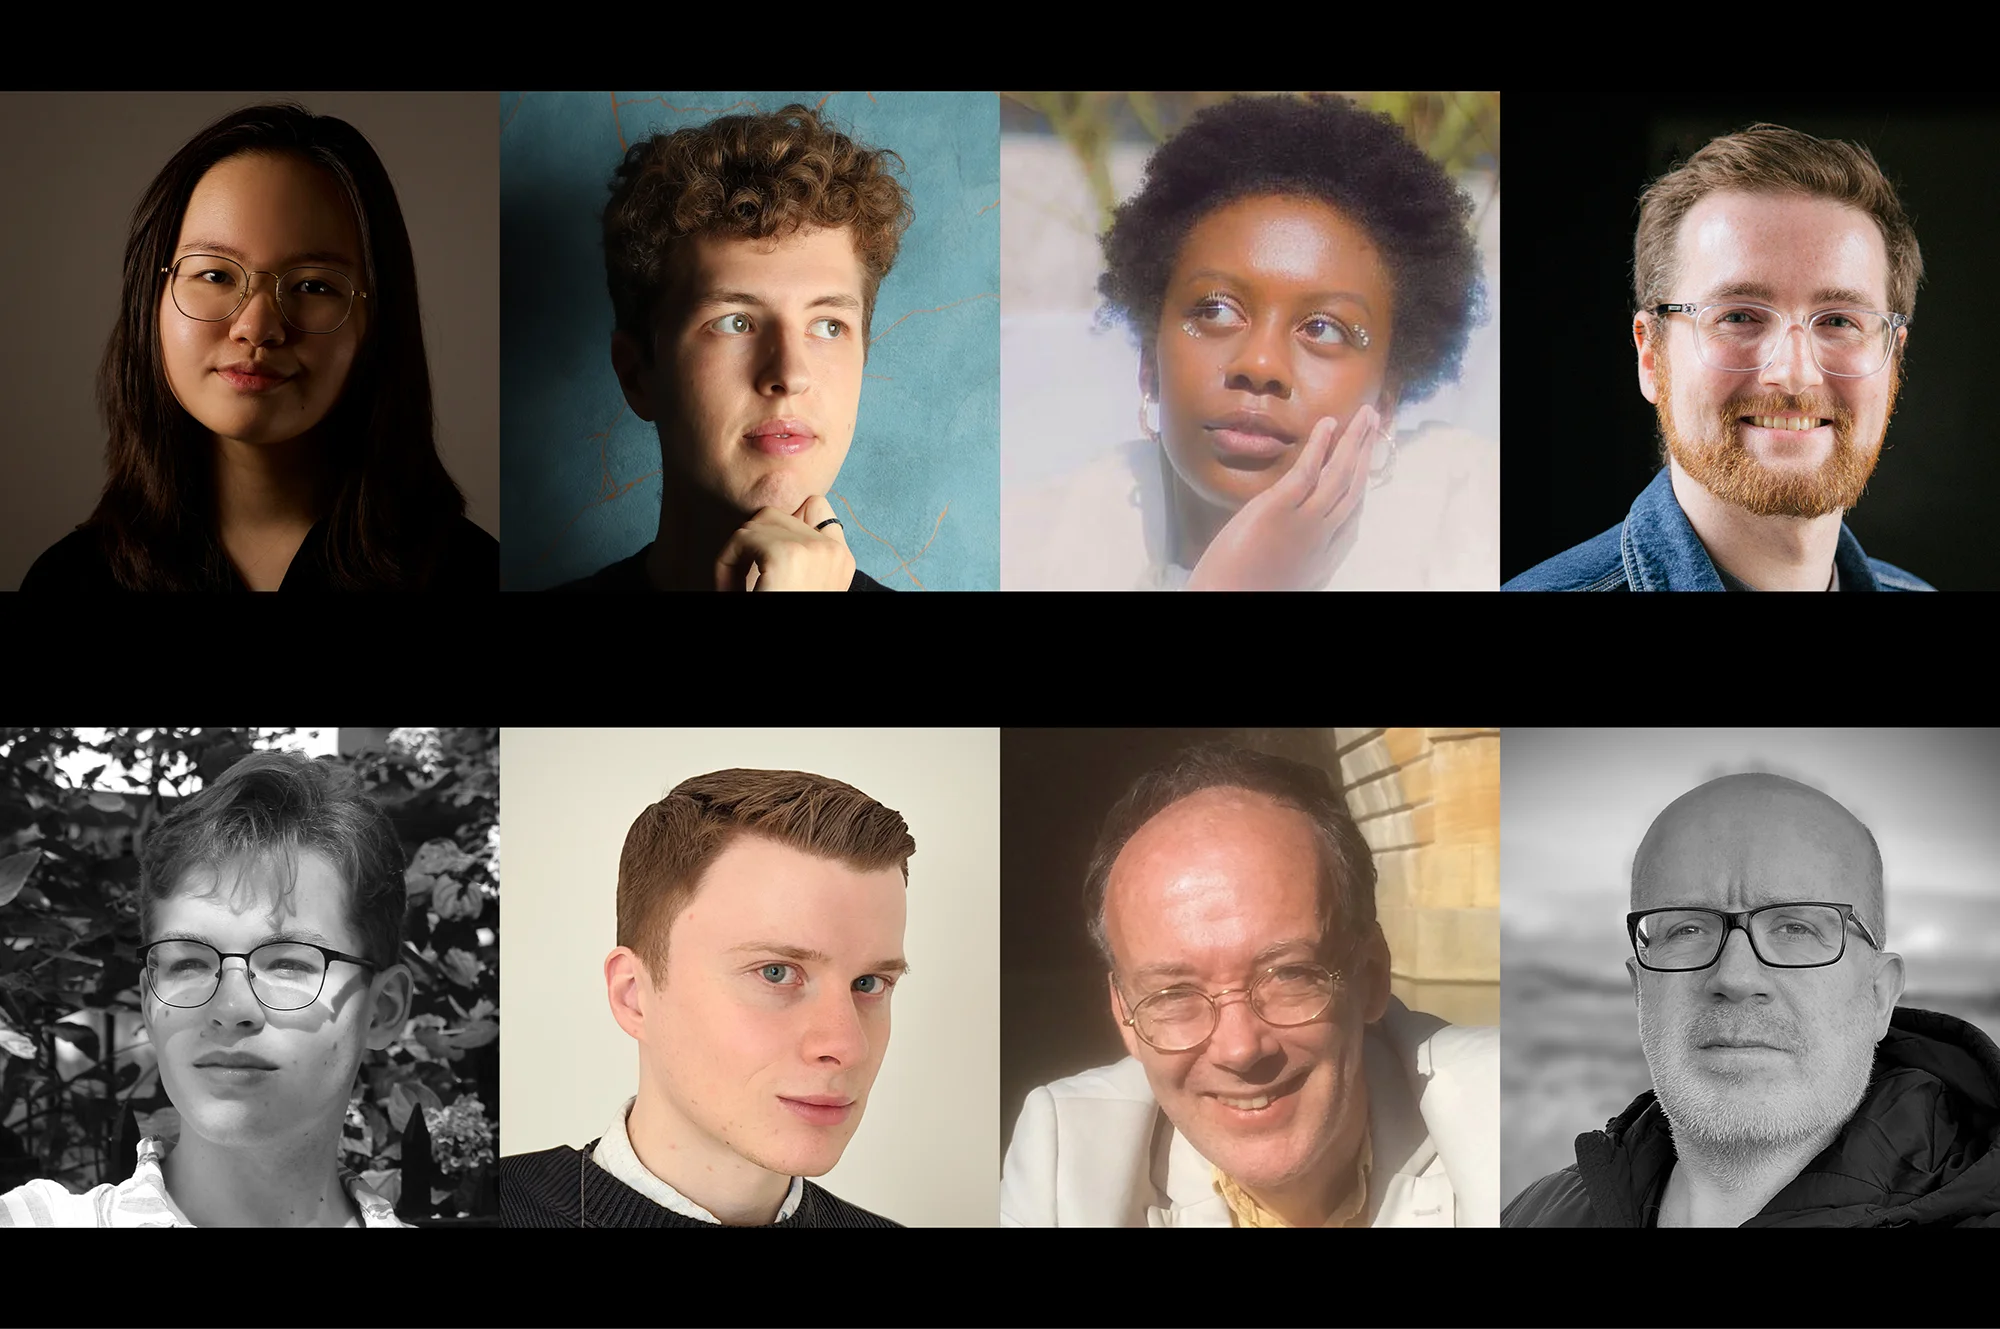 JAM will give London premieres of new works by Toh Yan Ee, Steve Richer, Donald Wetherick, Marisse Cato, George W. Parris, Anselm McDonnell, Christopher Churcher and Jonathan Woolgar; alongside pieces by Isabelle Ryder and international composer, Tarik O’Regan.